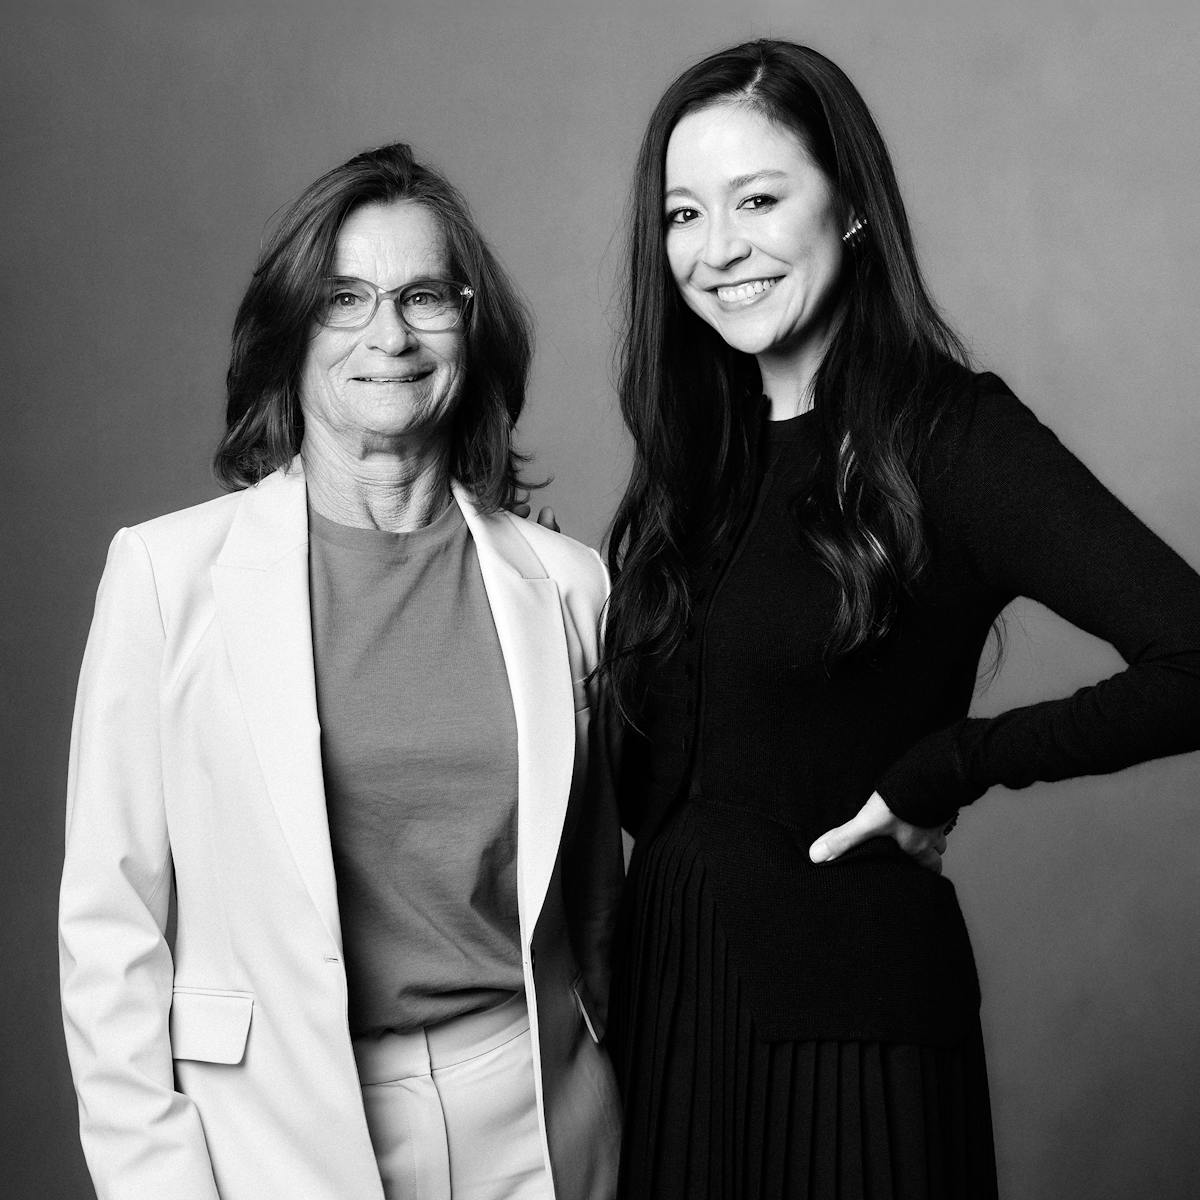 Bonnie Stoll and Elizabeth Chai Vasarhelyi stand together against a grey wall. Bonnie wears a white suit and Elizabeth wears all black.